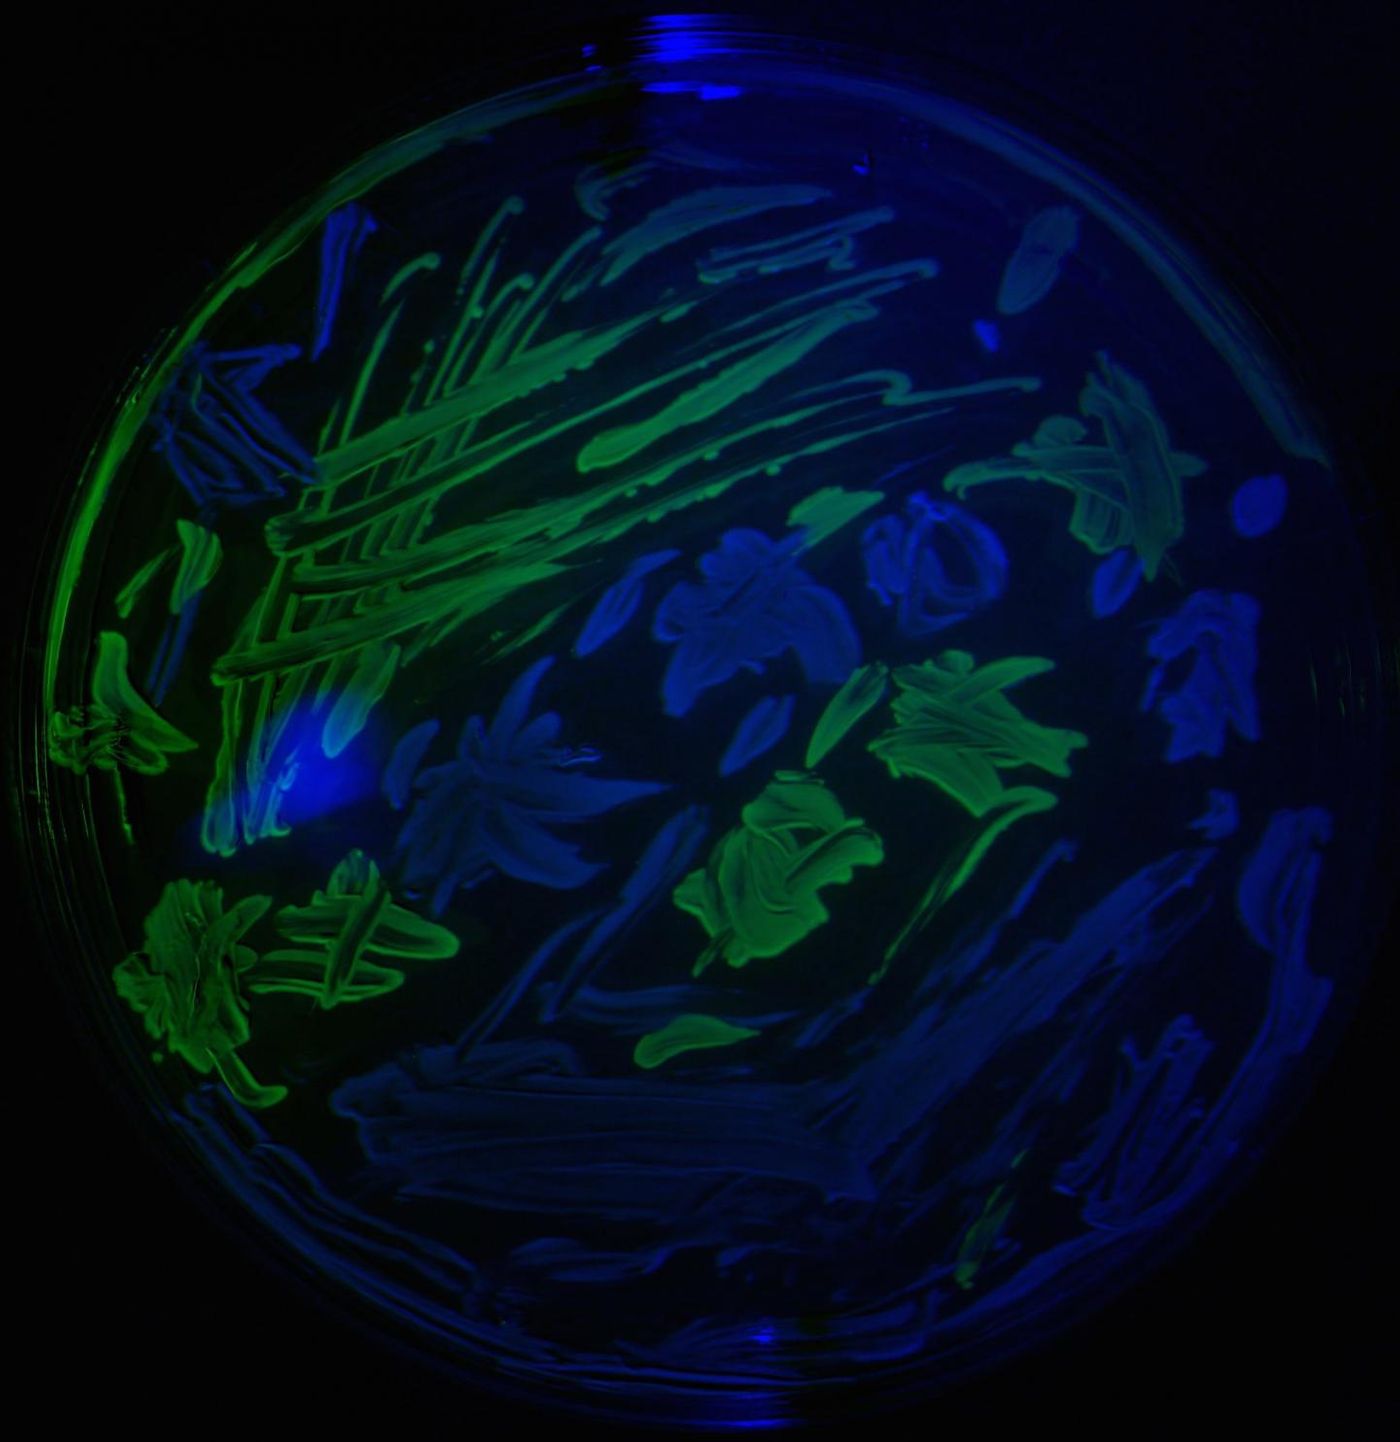 These are two types of lab E. coli smeared across an agar plate. The green ones are drug resistant and the blue ones are not. / Credit: The University of Exeter